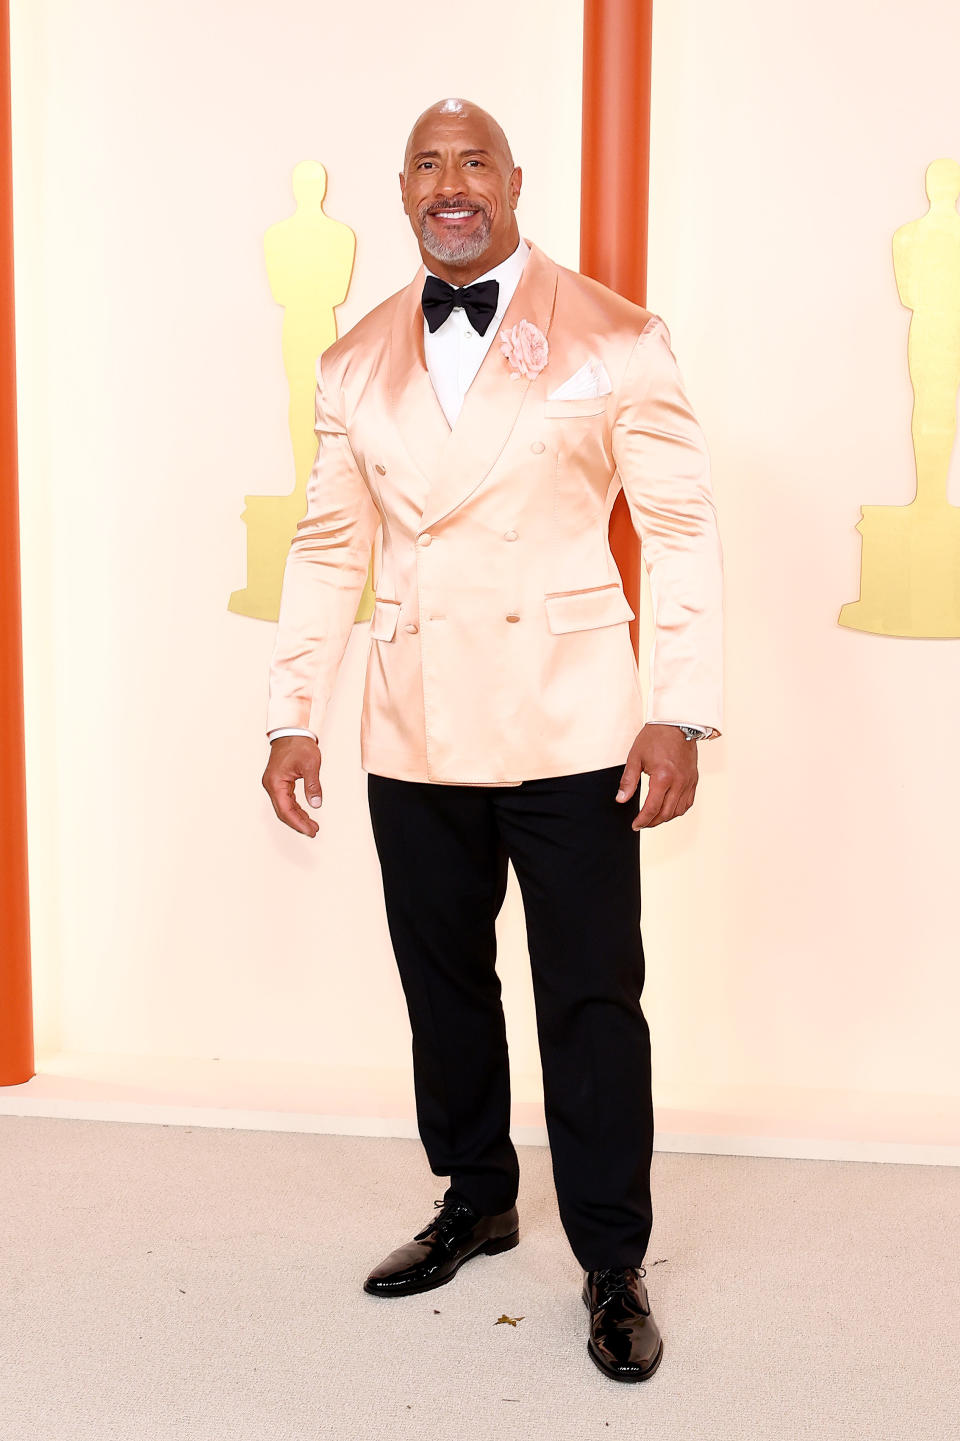 HOLLYWOOD, CALIFORNIA - MARCH 12: Dwayne Johnson attends the 95th Annual Academy Awards on March 12, 2023 in Hollywood, California. (Photo by Arturo Holmes/Getty Images )